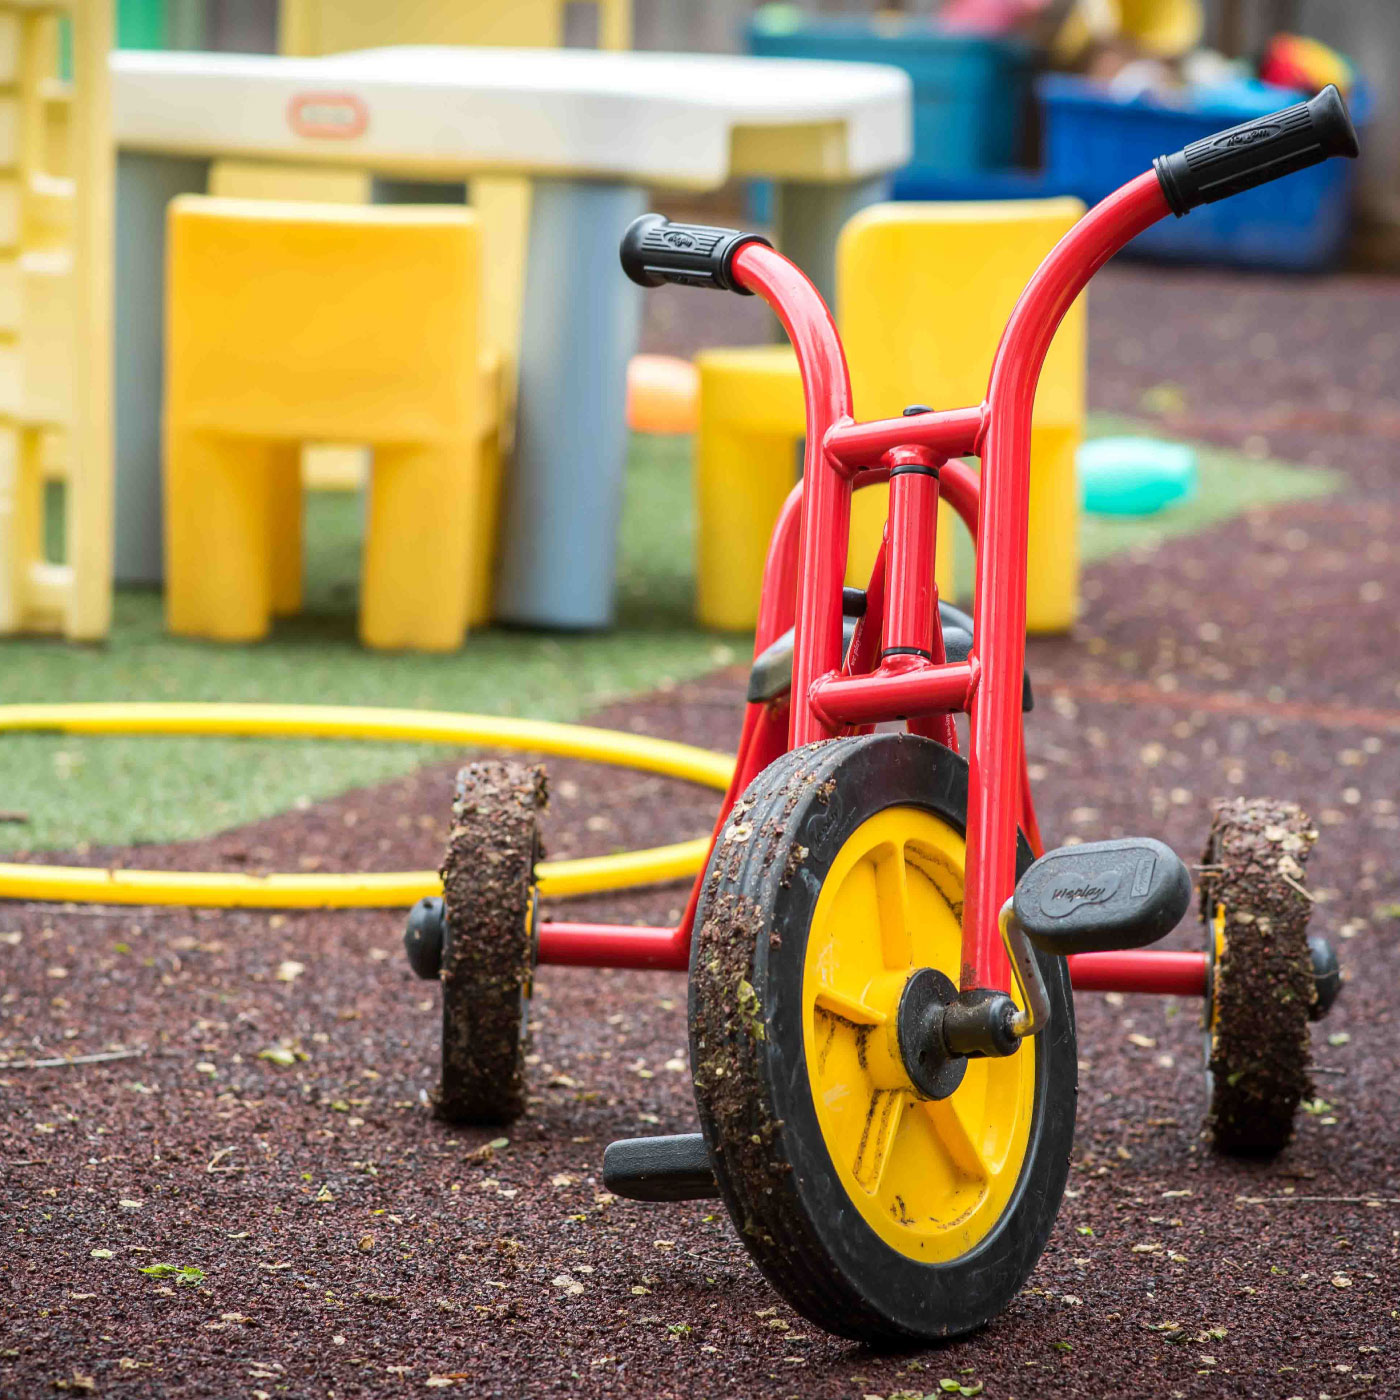 A red tricycle with yellow wheels on a playground